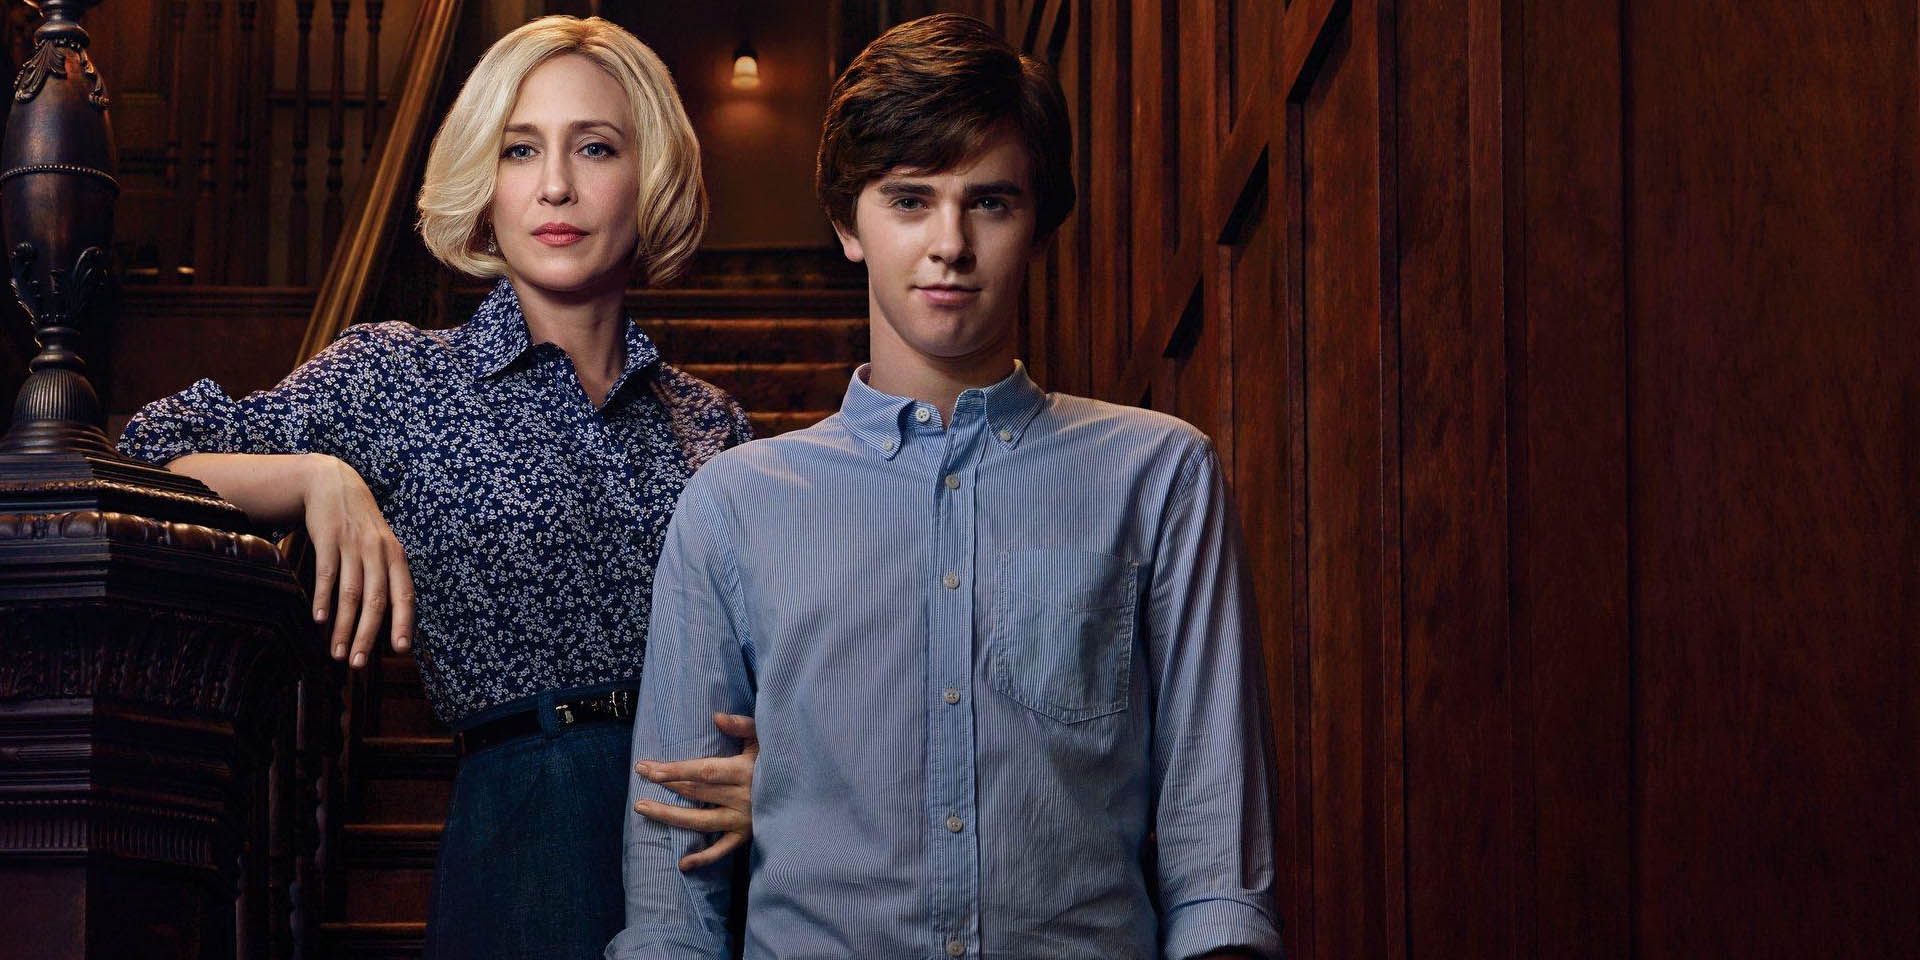 Characters from the TV series Bates Motel.